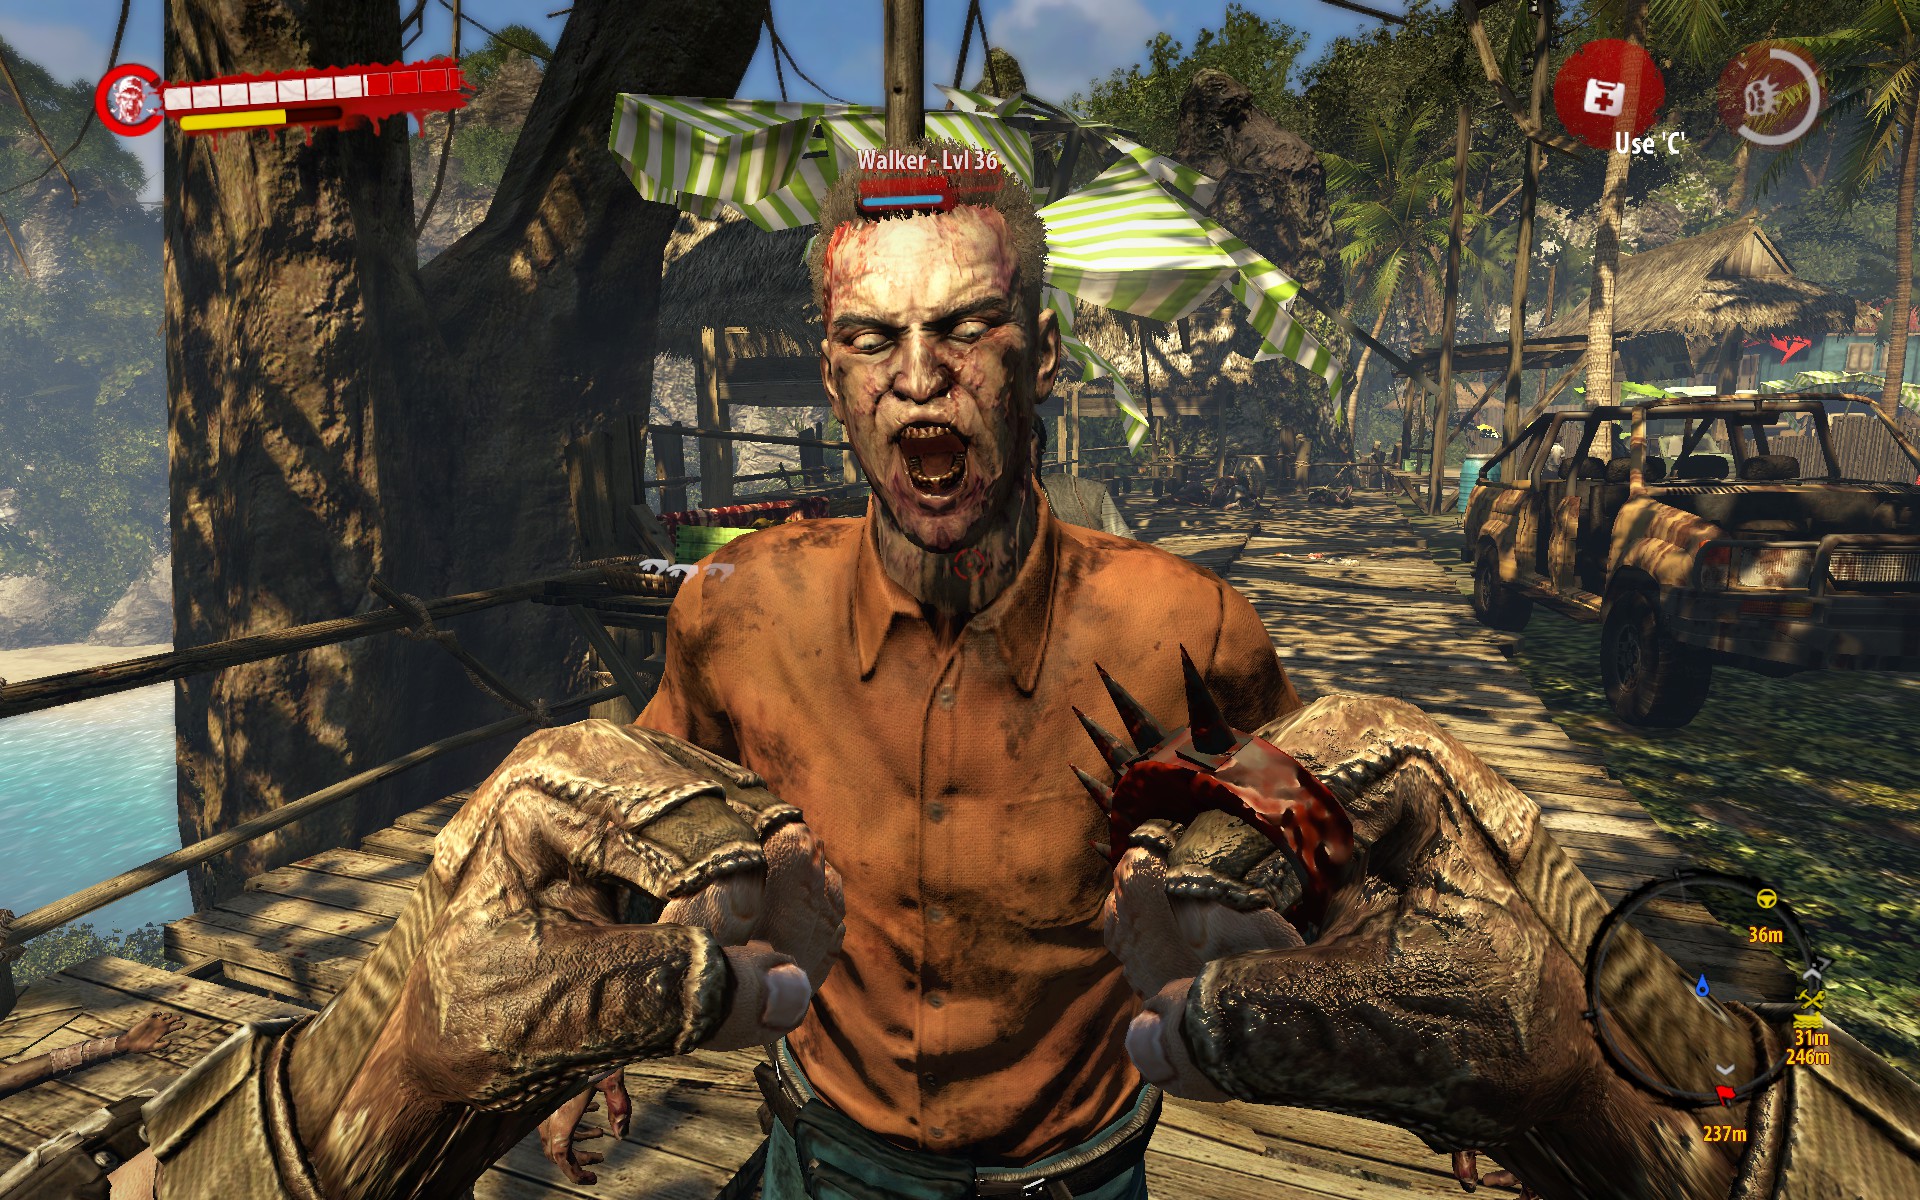 Dead Island Riptide: The Review